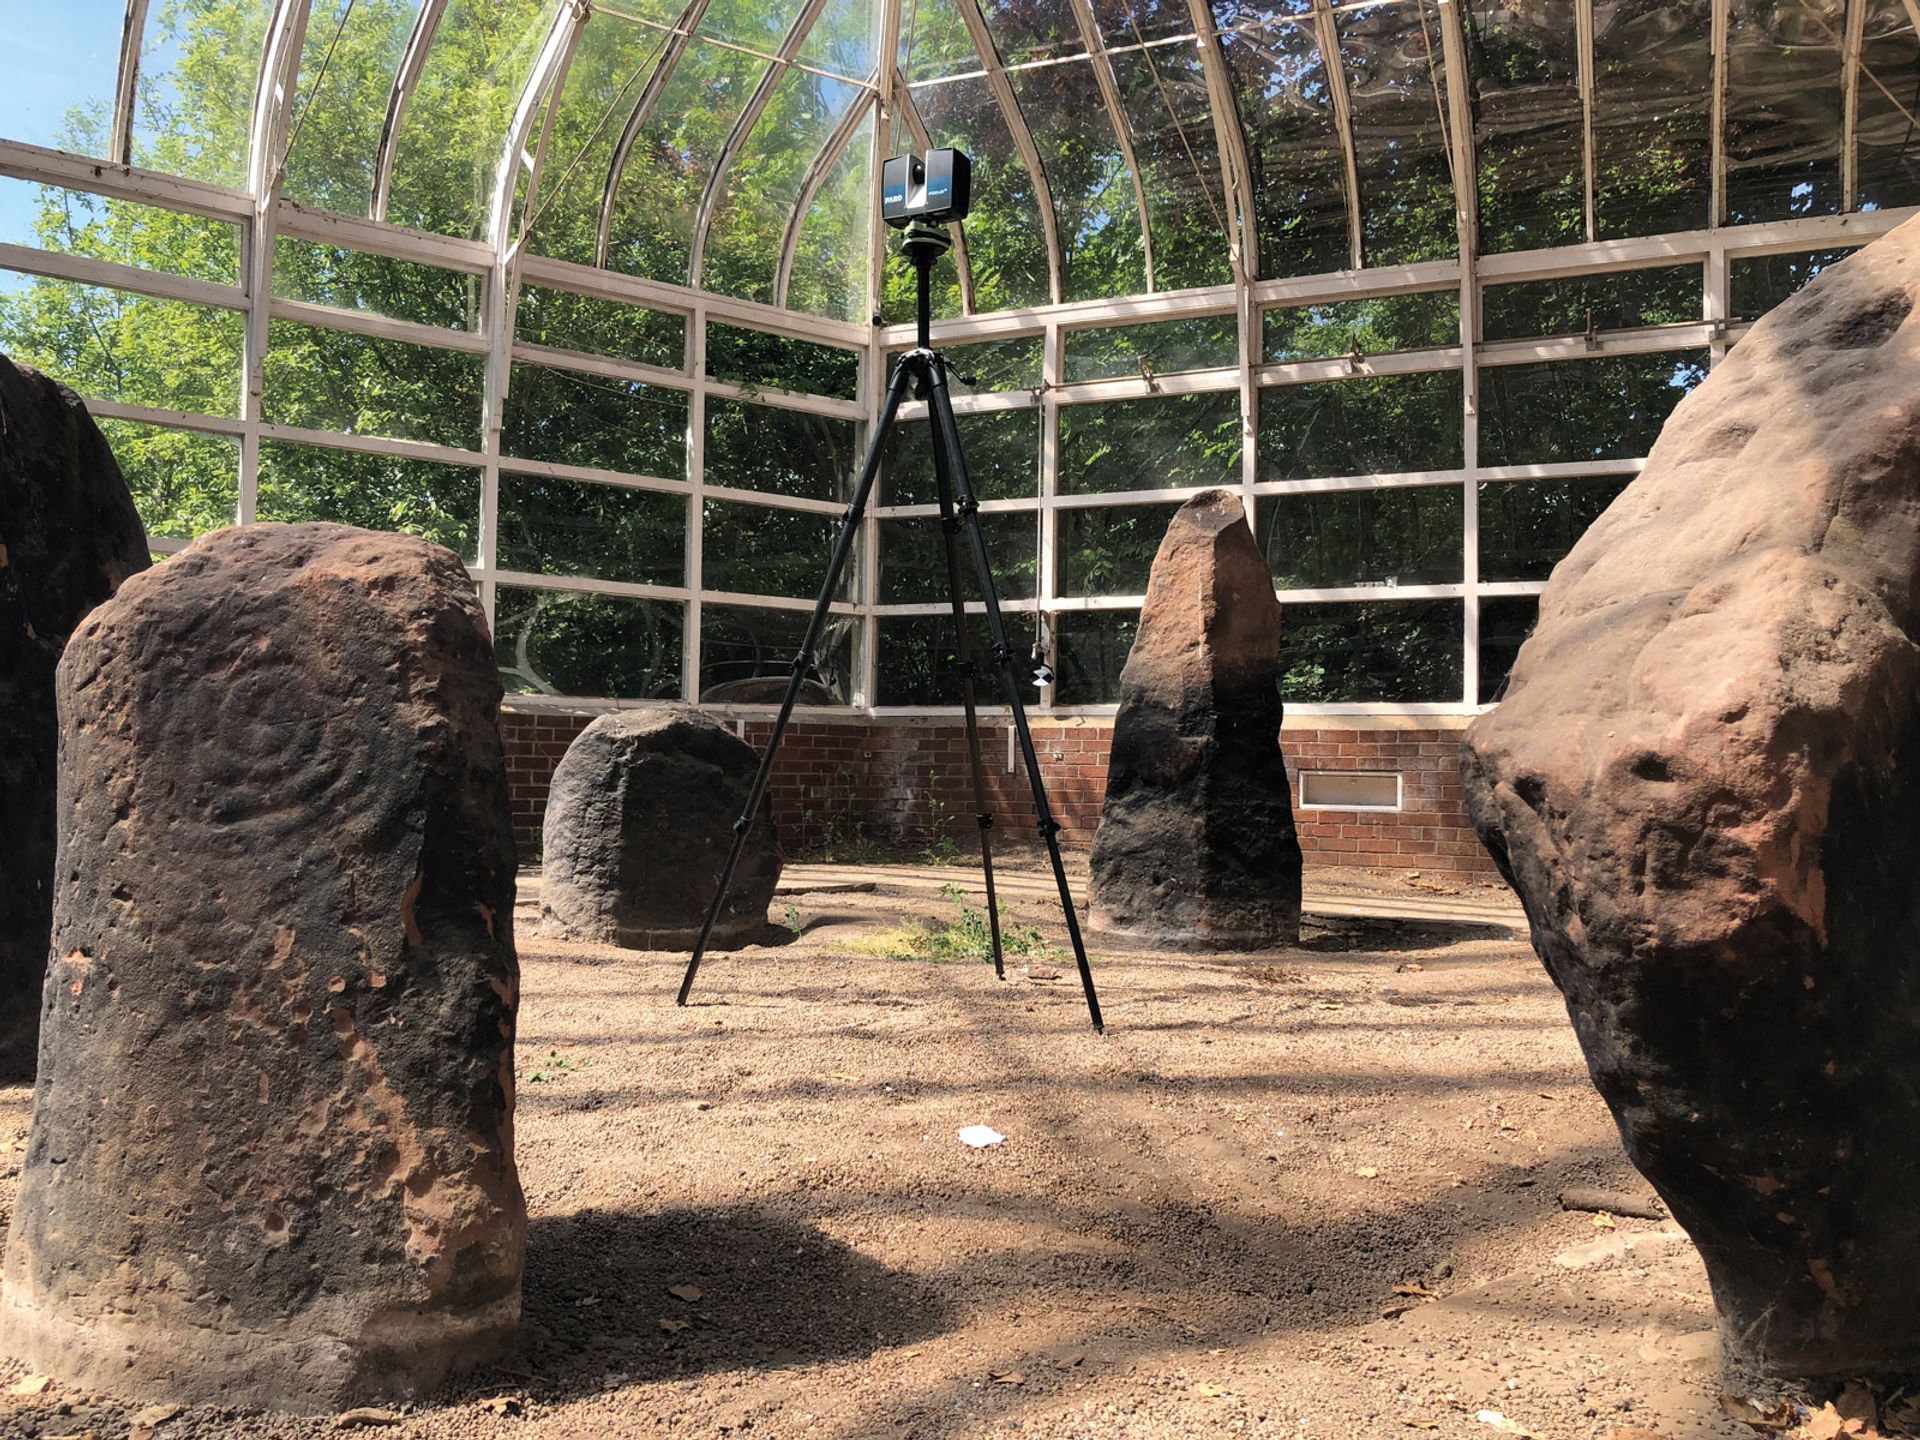 The six megaliths were 3D-scanned before treatment Courtesy of Orbis Conservation